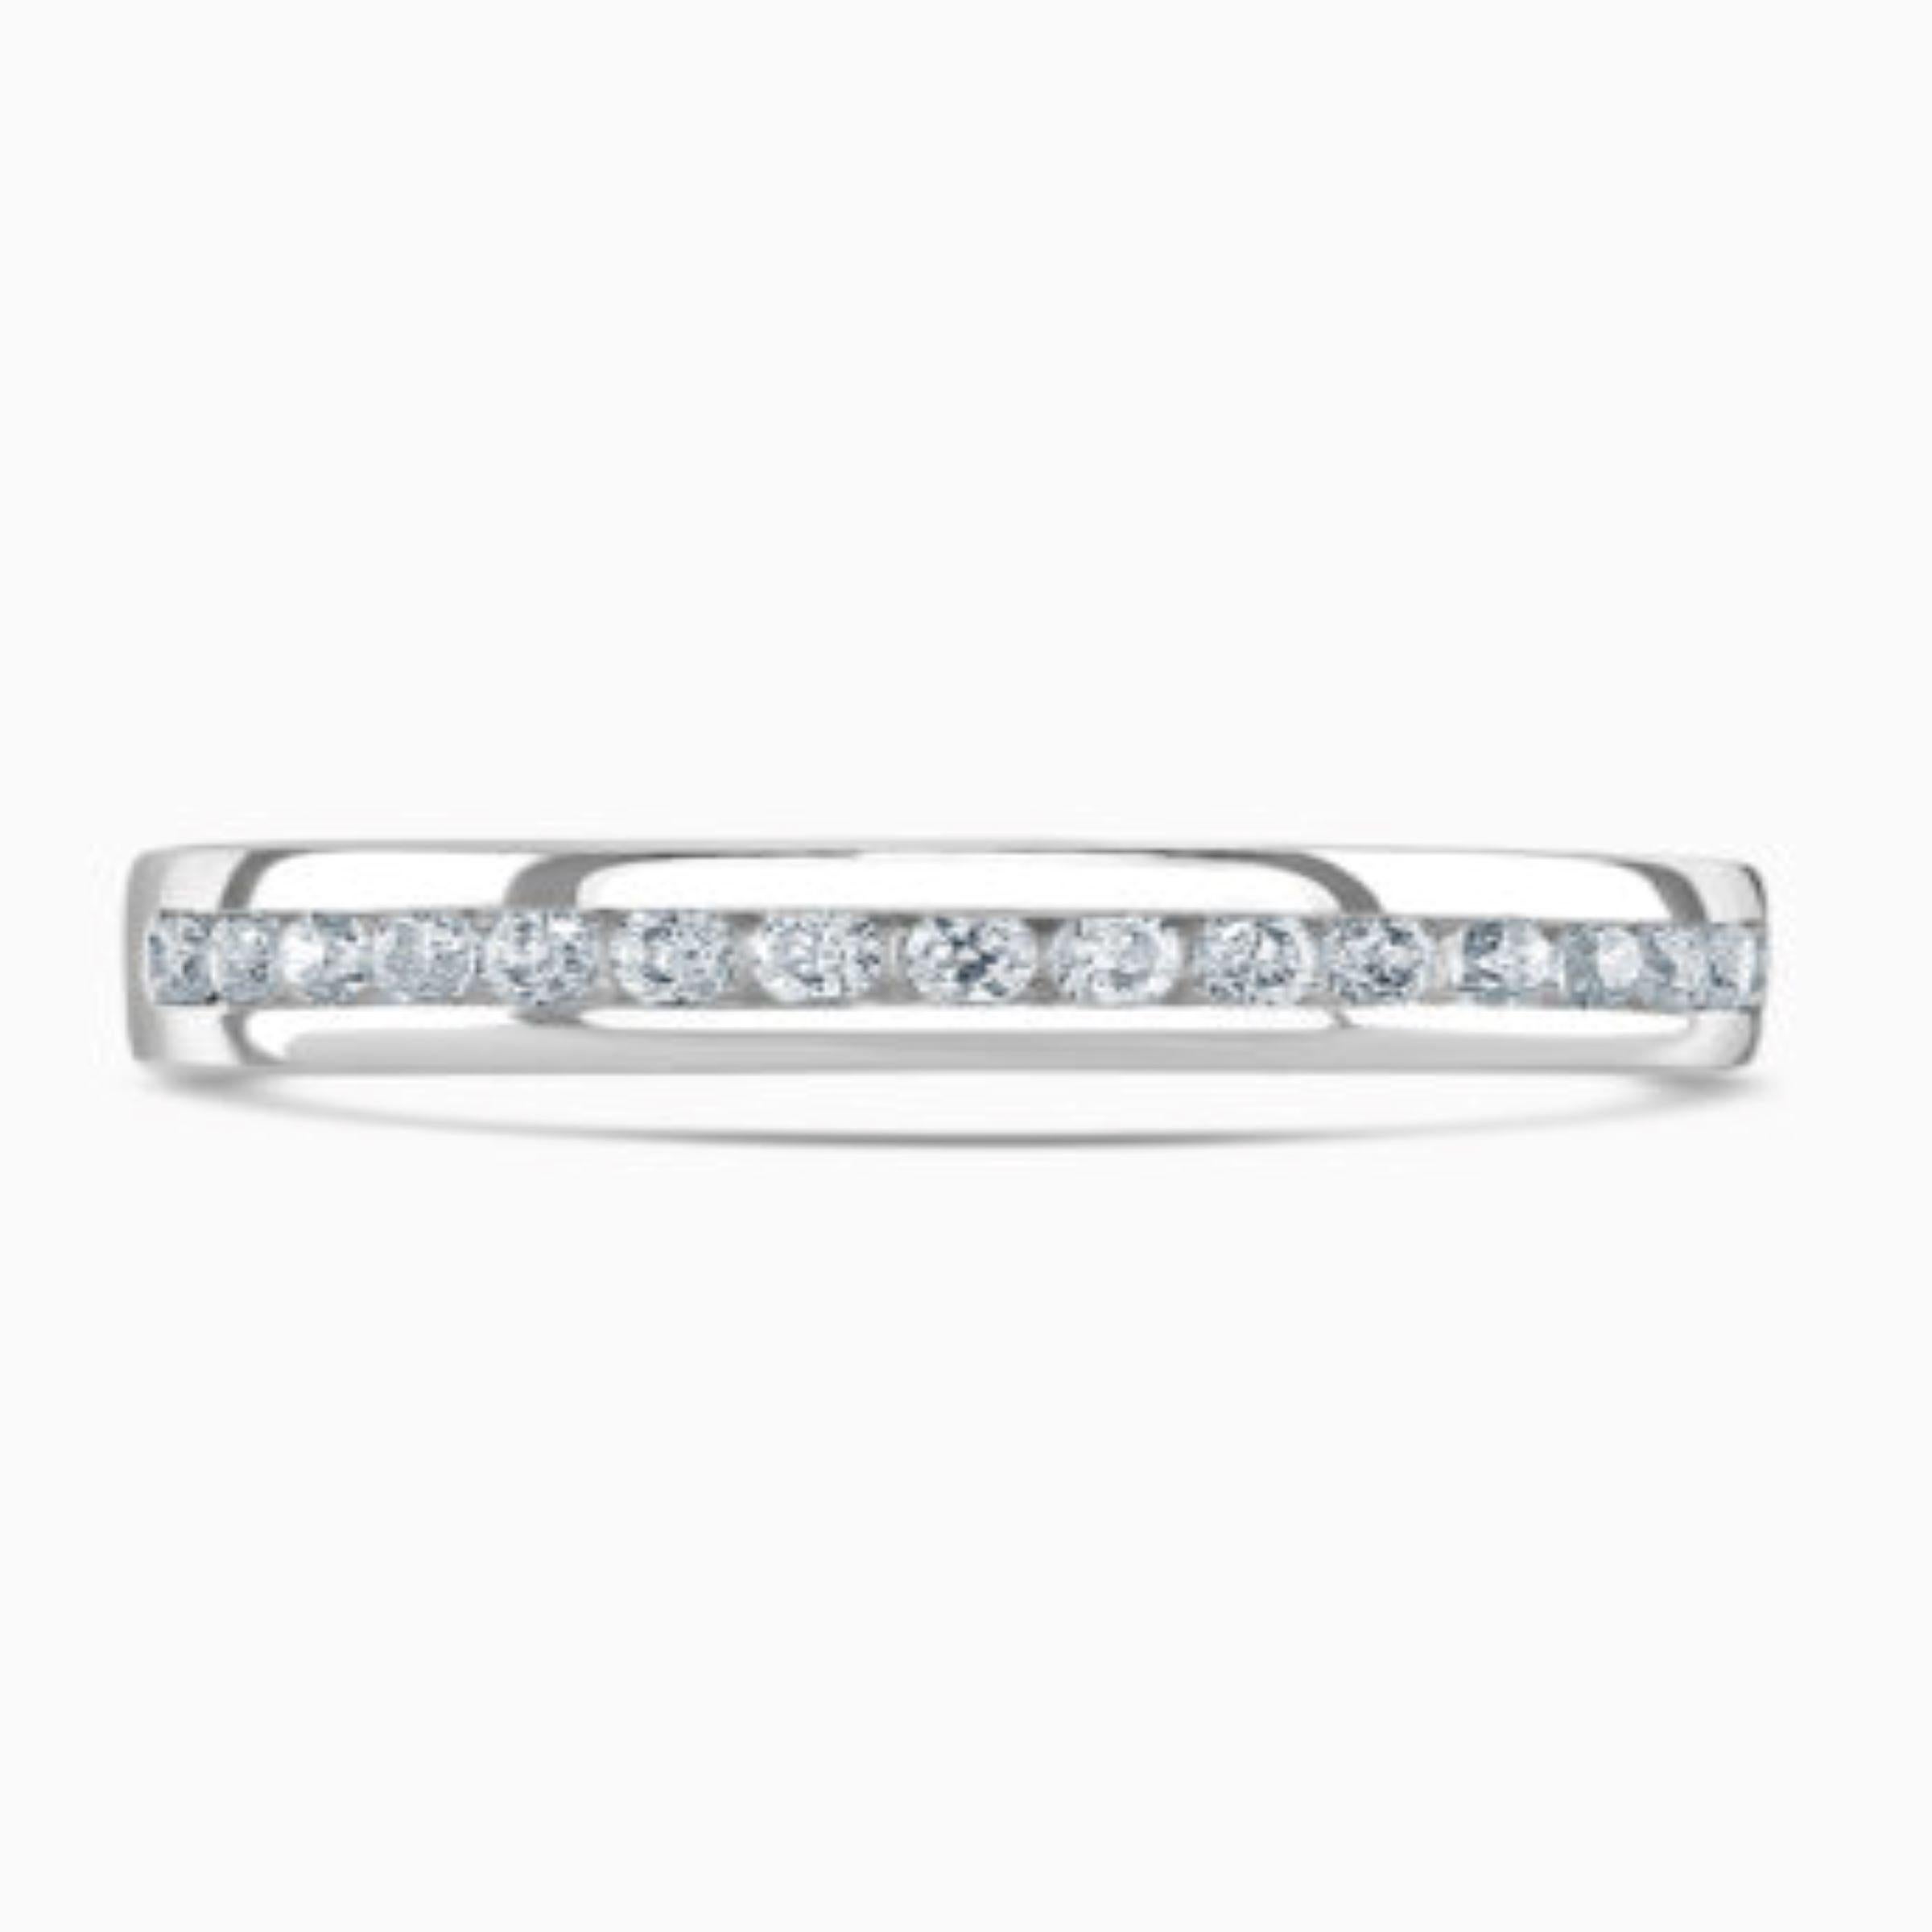 Handcrafted made in Platinum, set with round brilliant cut diamonds adorn 50% of this straight edged band. Total carat weight 0.30ct. 

Platinum ring can be re-sized up and down, beautiful contemporary style suitable for daily wear.

This Diamond